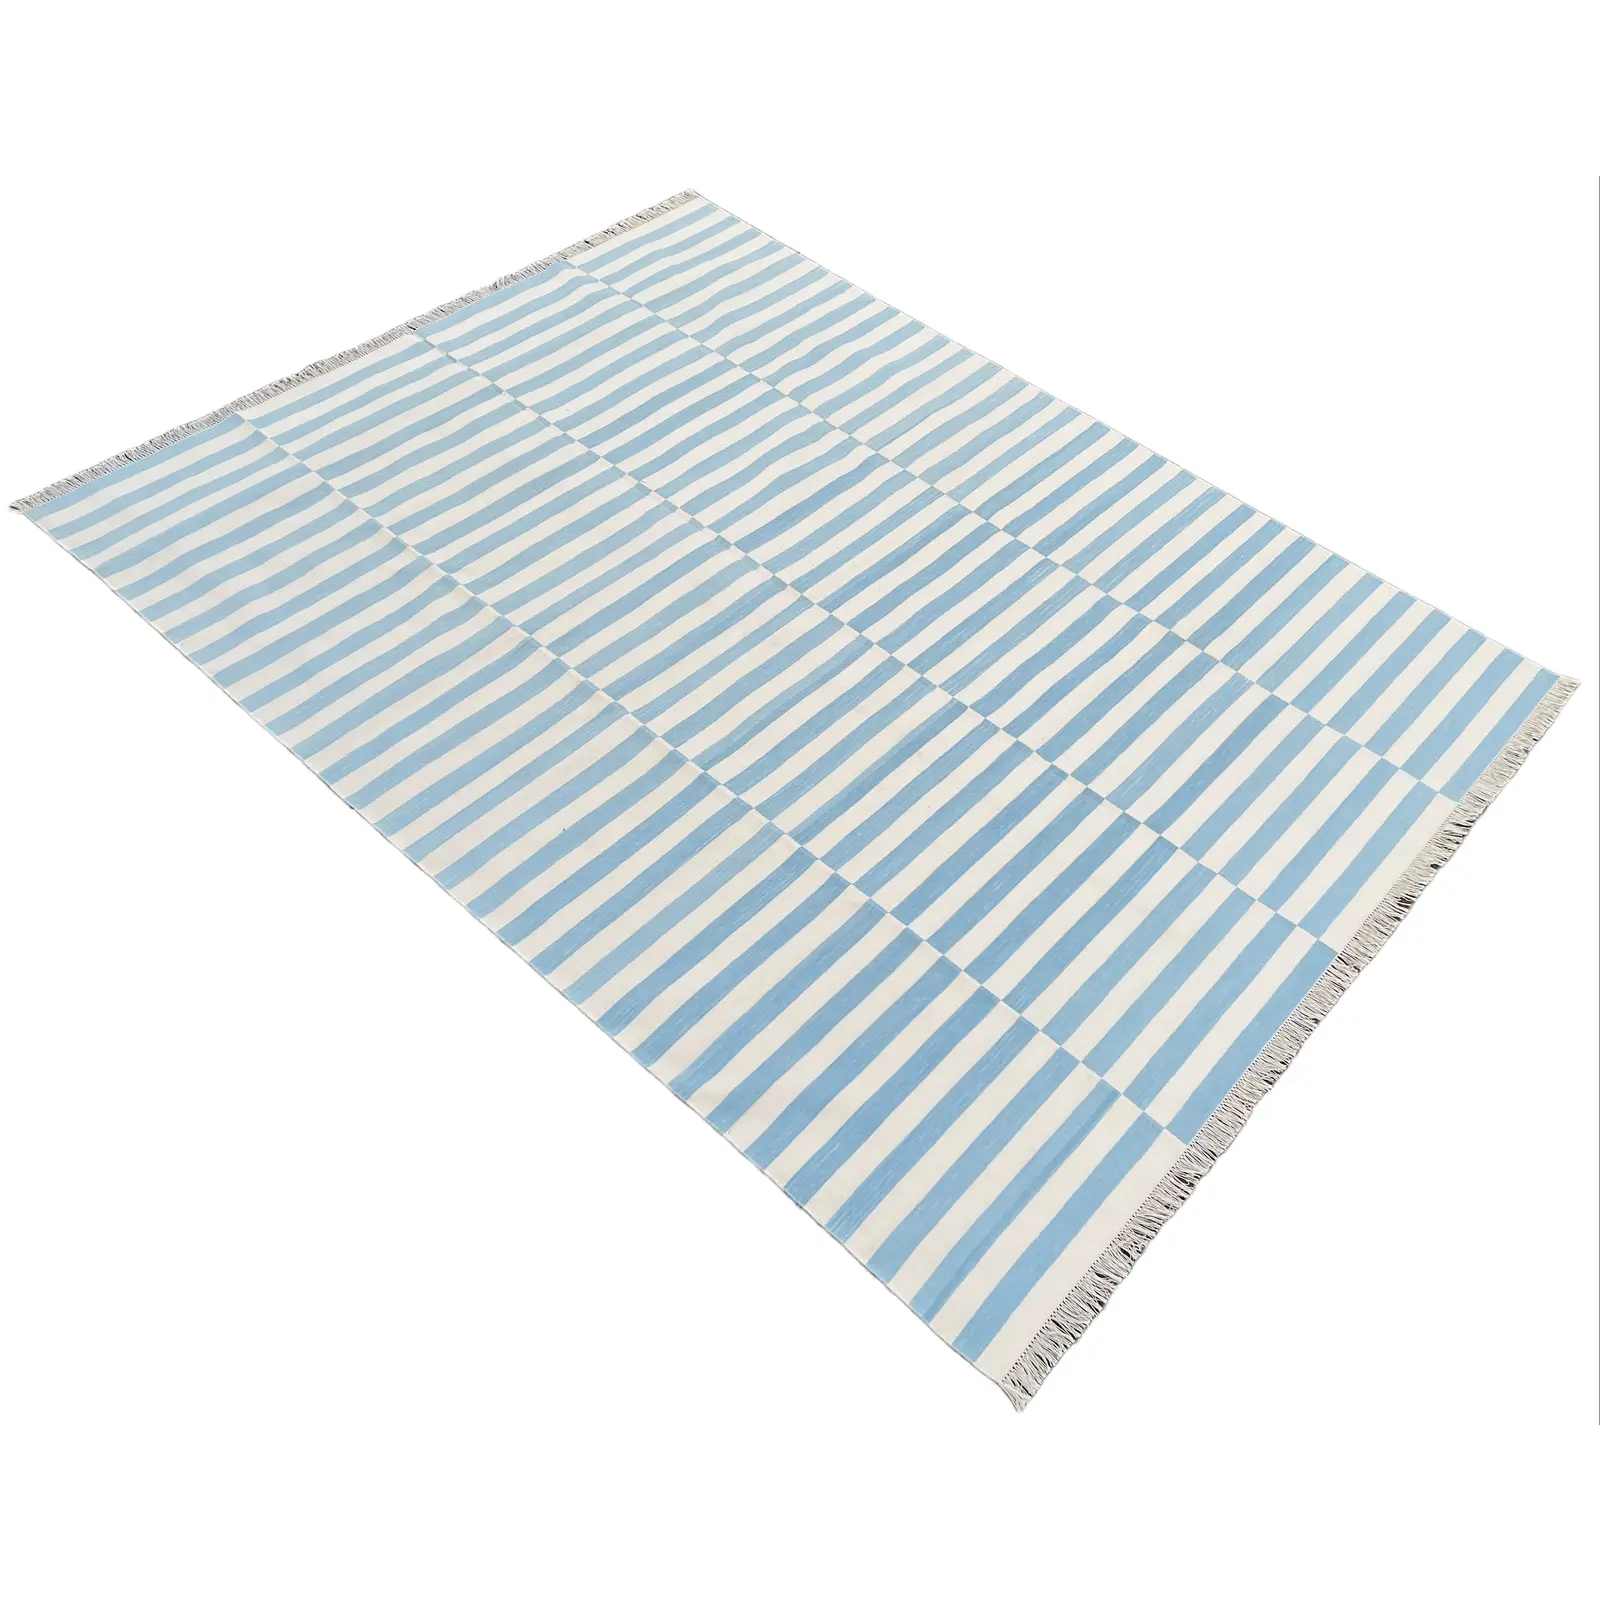 handmade-reversible-cotton-vegetable-dyed-blue-and-white-striped-rug-10x14-8500.png